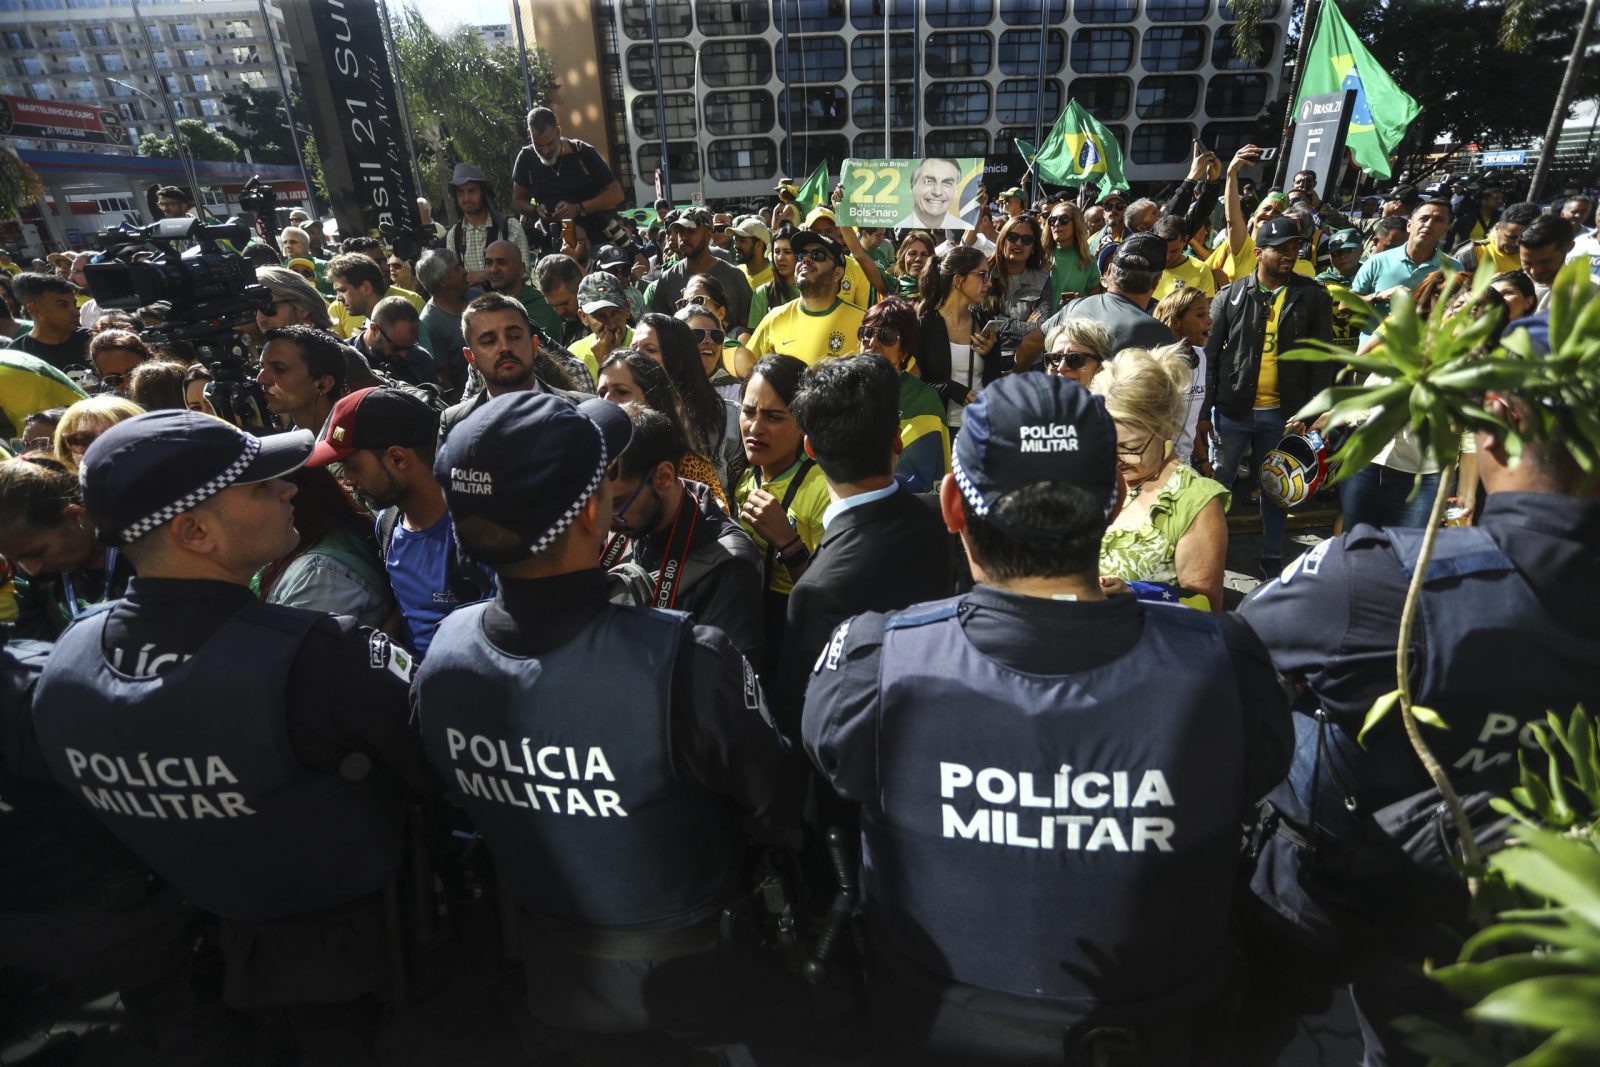 epa10550492 Members of the Military Police watch supporters of former Brazilian president Bolsonaro gather outside the Liberal Party's headquarters in Brasilia, Brazil, 30 March 2023. Bolsonaro returned to Brazil after an 89 days in Florida, USA, to where he traveled two days before his term ended.  EPA/Luis Nova